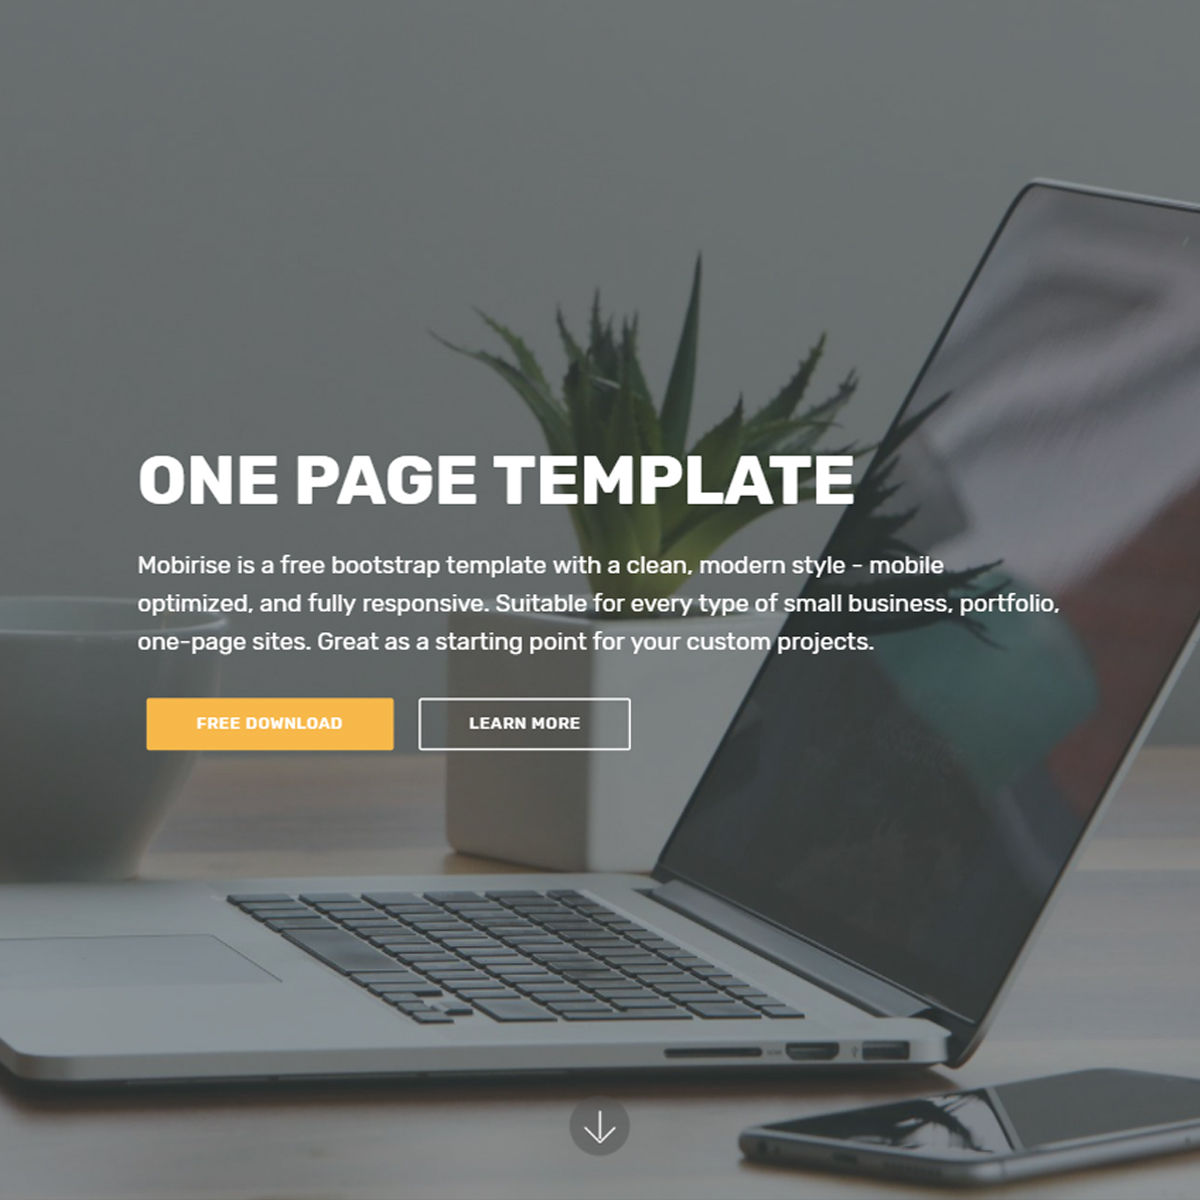 One Page Bootstrap Template Demo